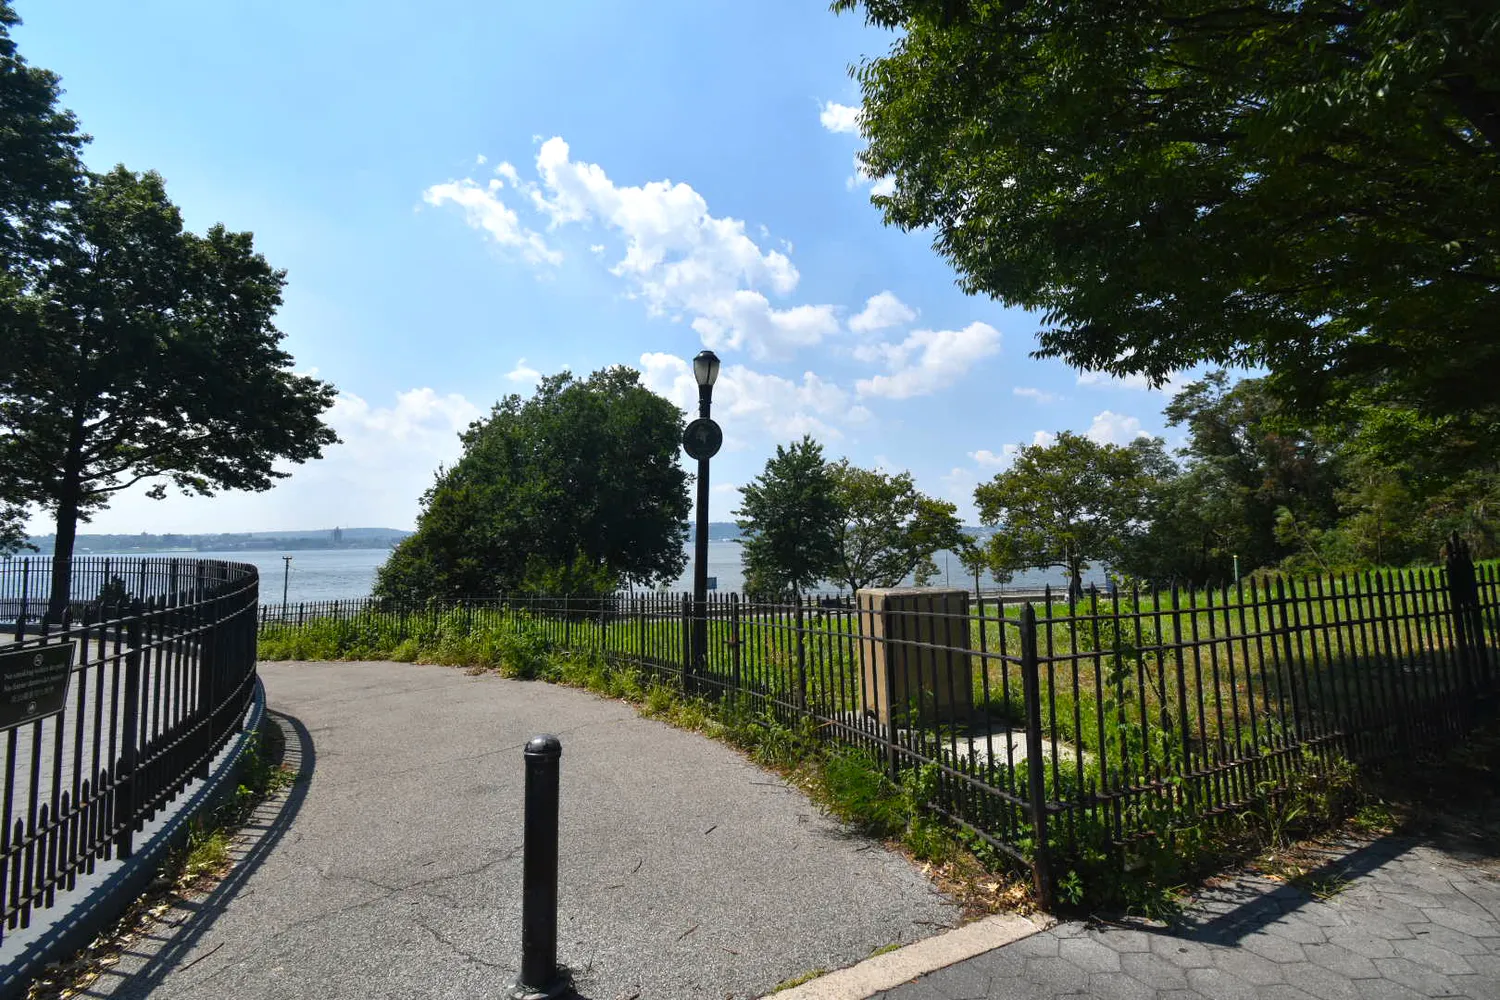 Shore Road Park's waterfront is across the street